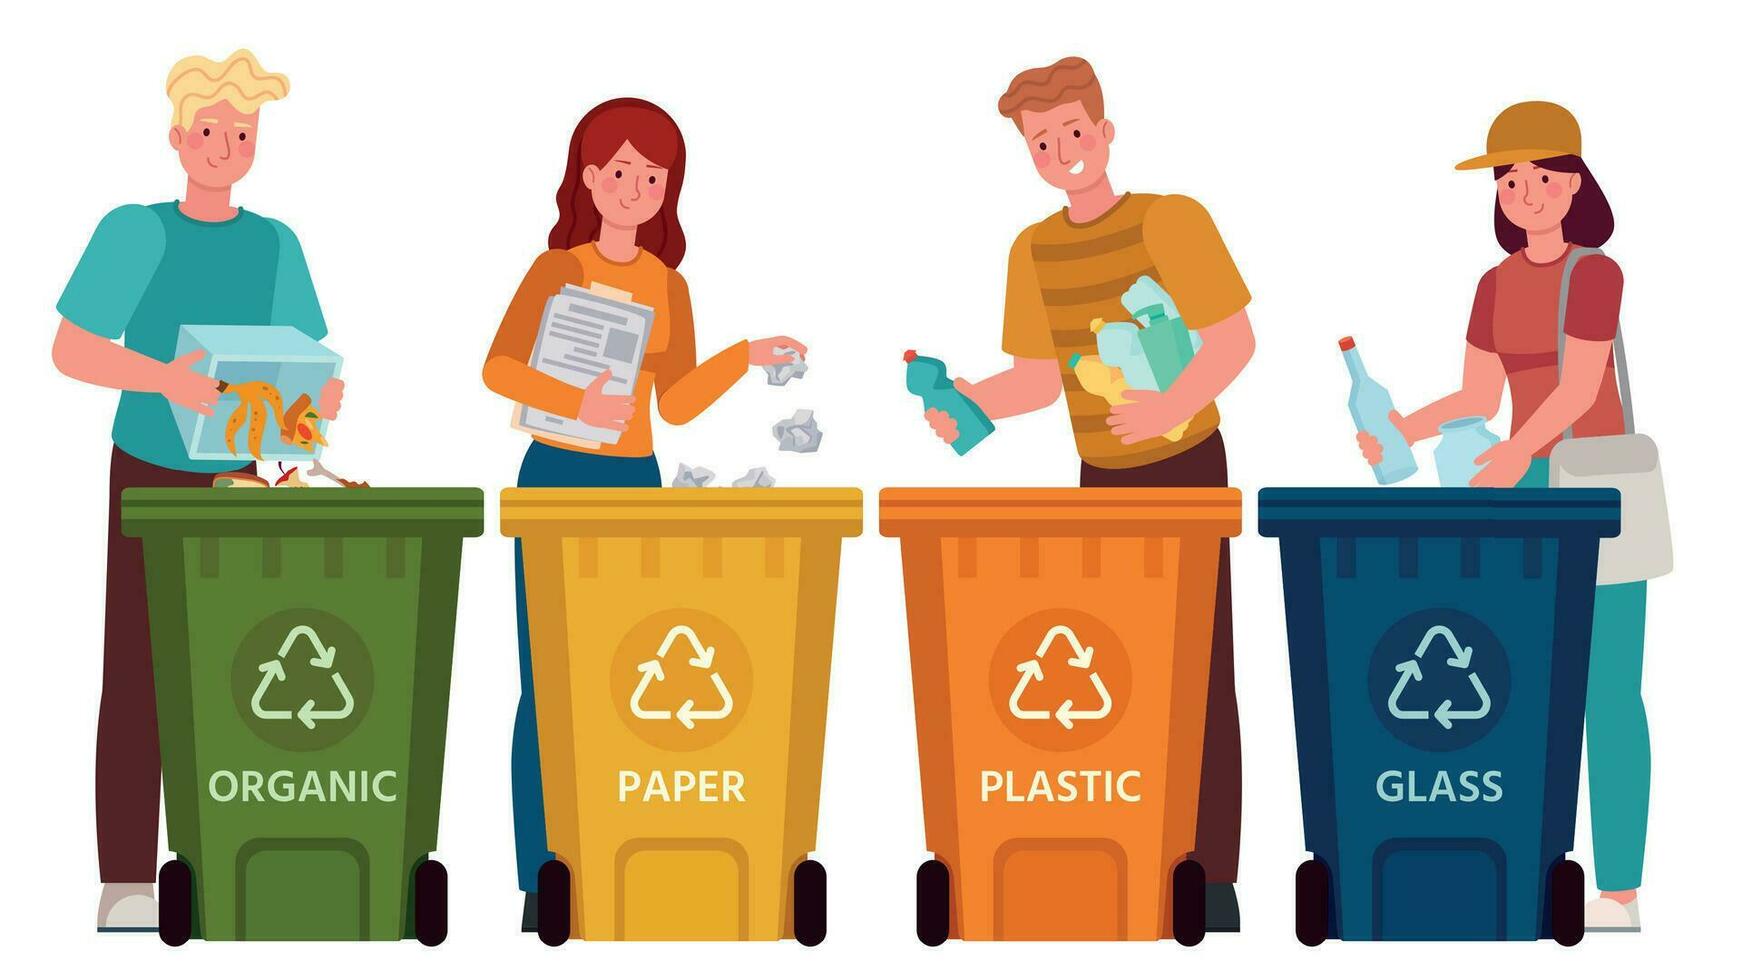 People sorting garbage. Men and women separate waste and throwing trash into recycling bins. Ecology lifestyle vector illustration